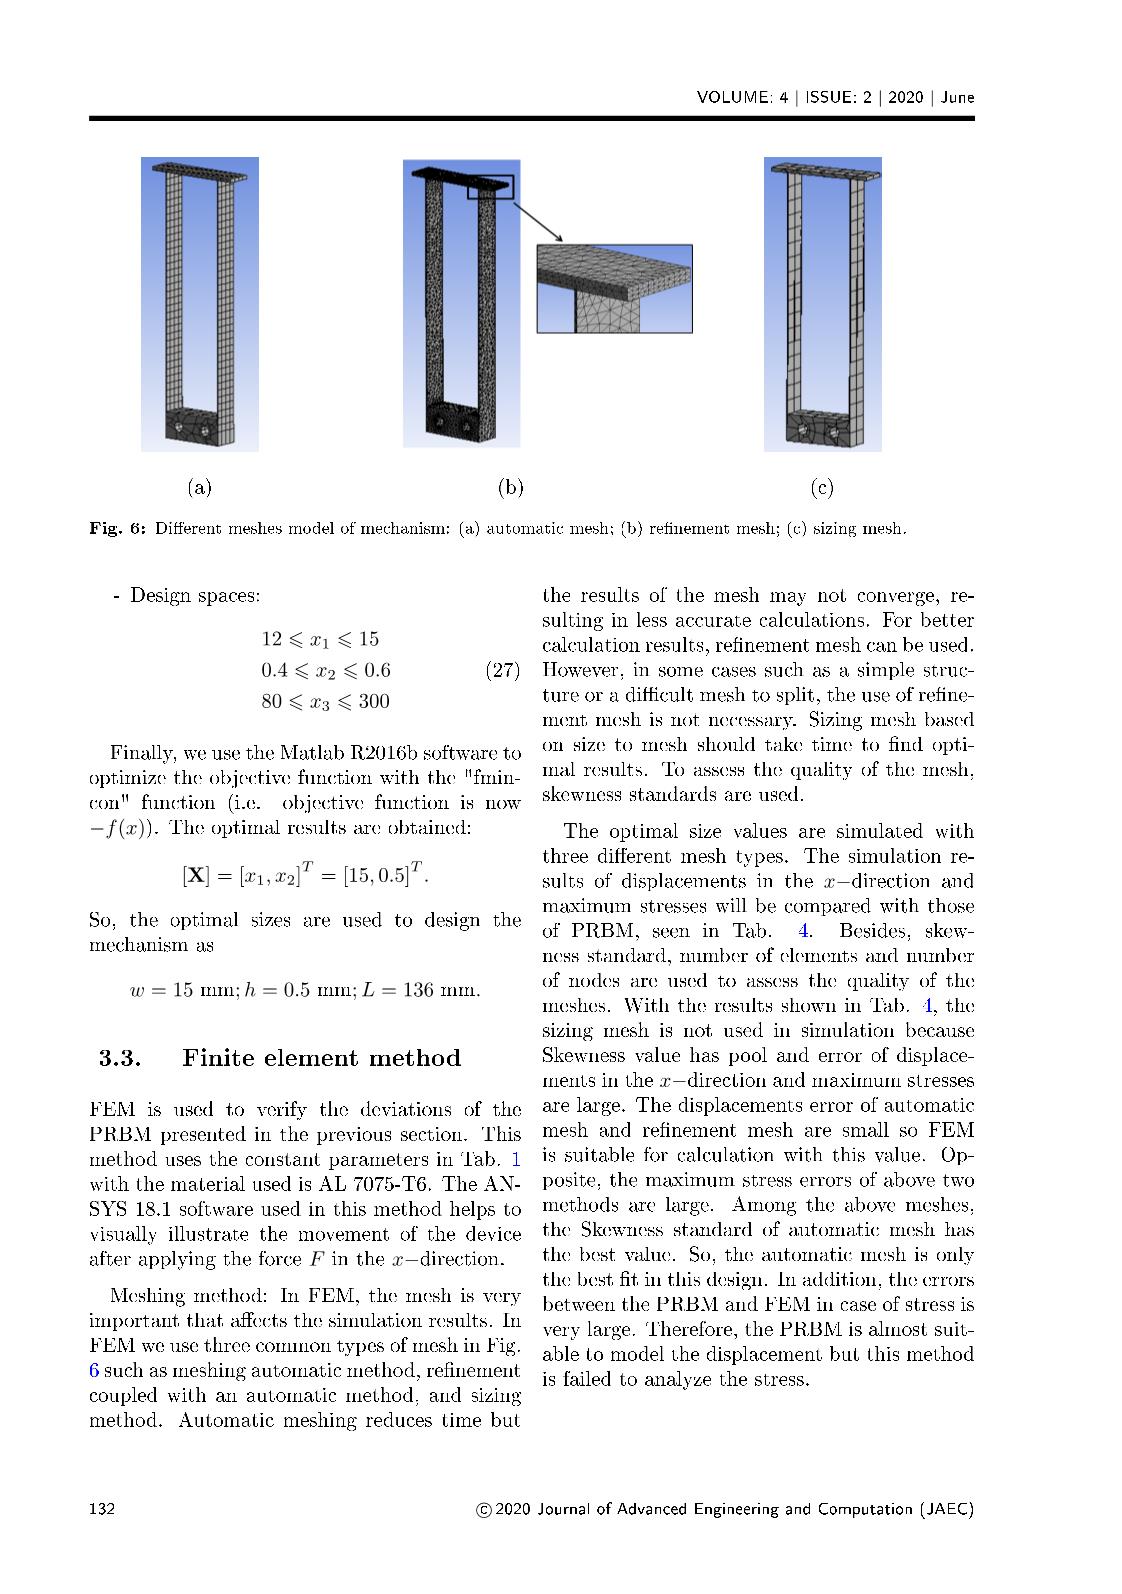 Statics analysis and optimization design for a fixed - guided beam flexure trang 8